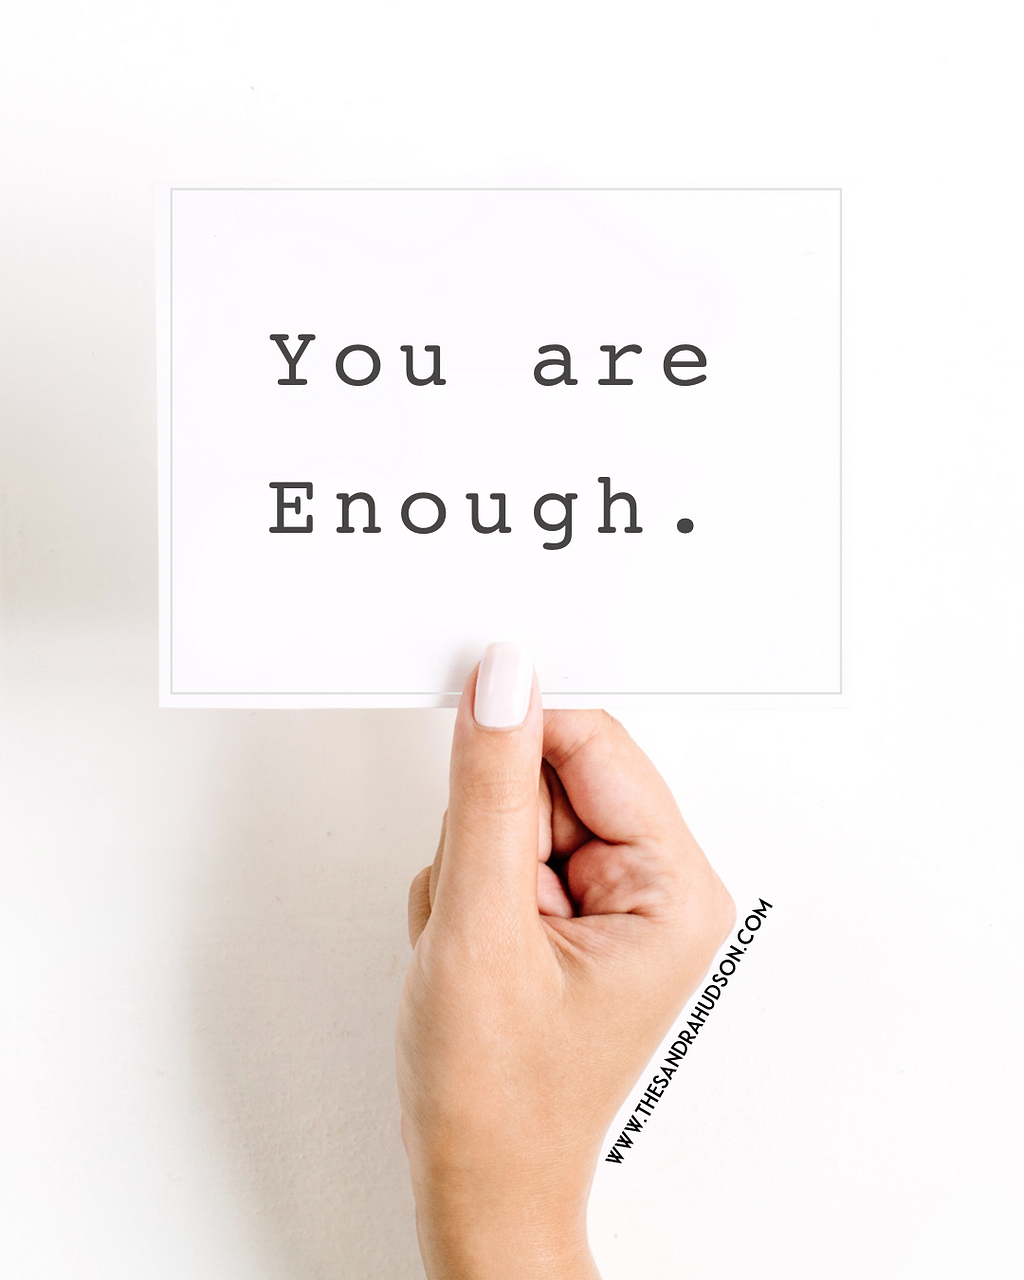 You are enough affirmation